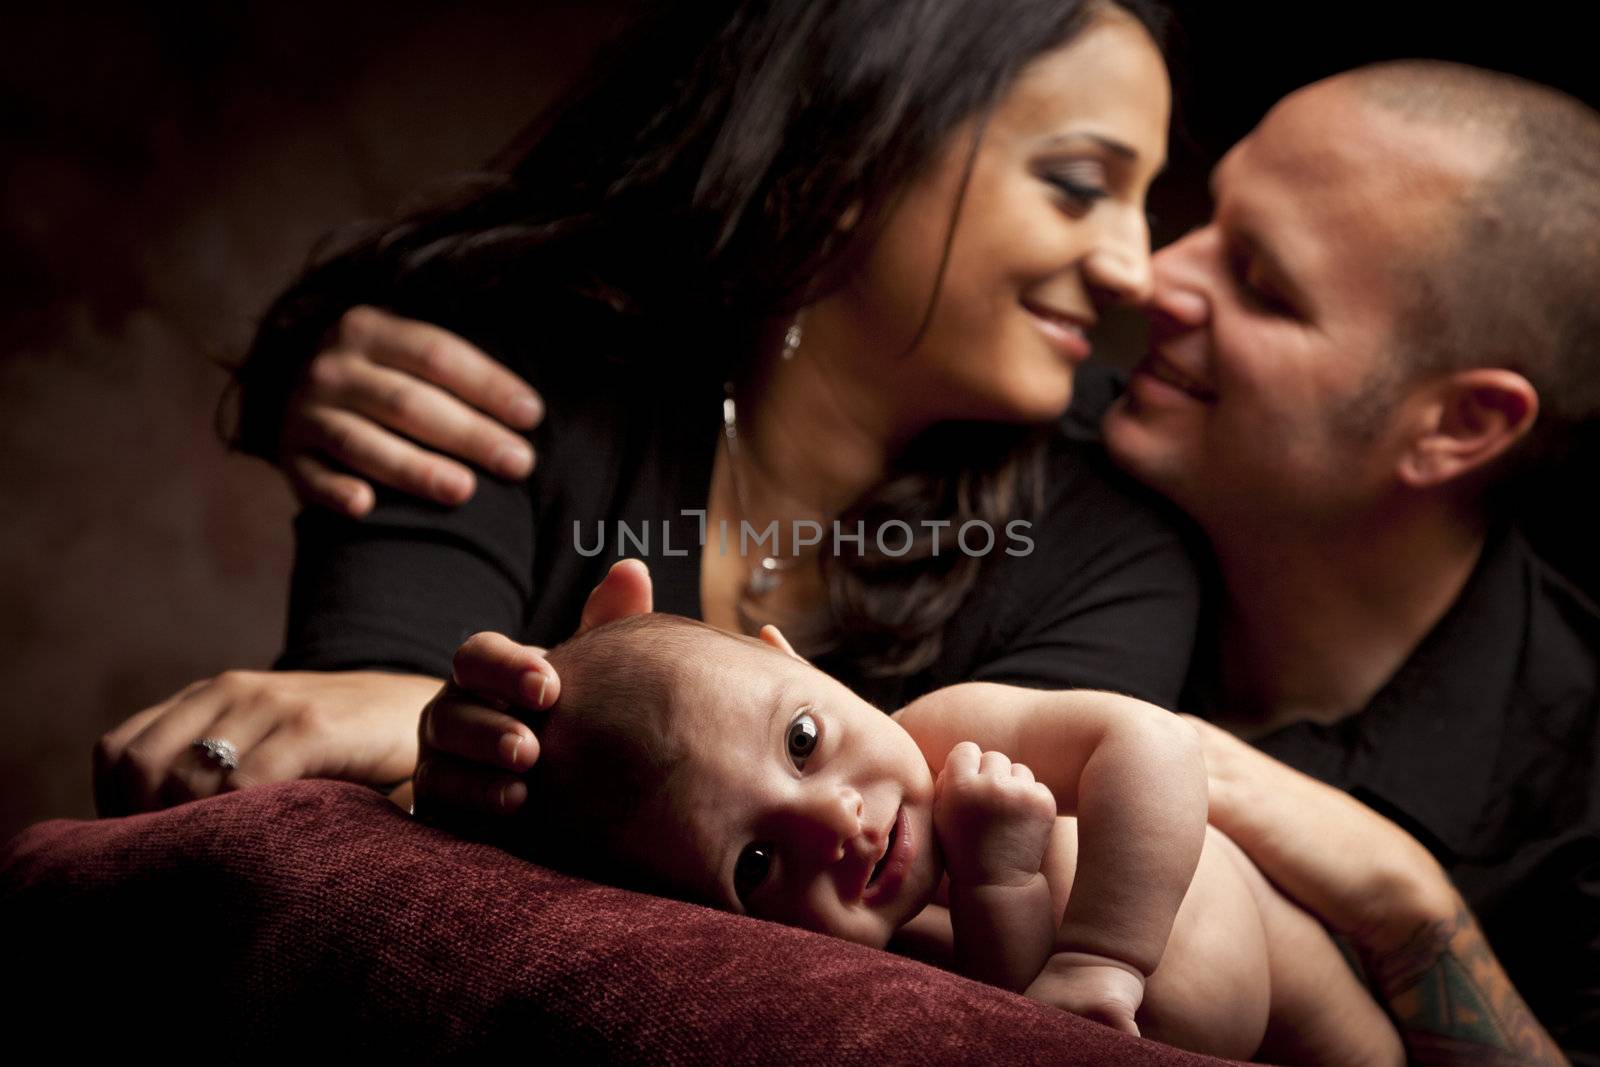 Mixed Race Couple Lovingly Look On While Baby Lays on Pillow on a Dark Background.